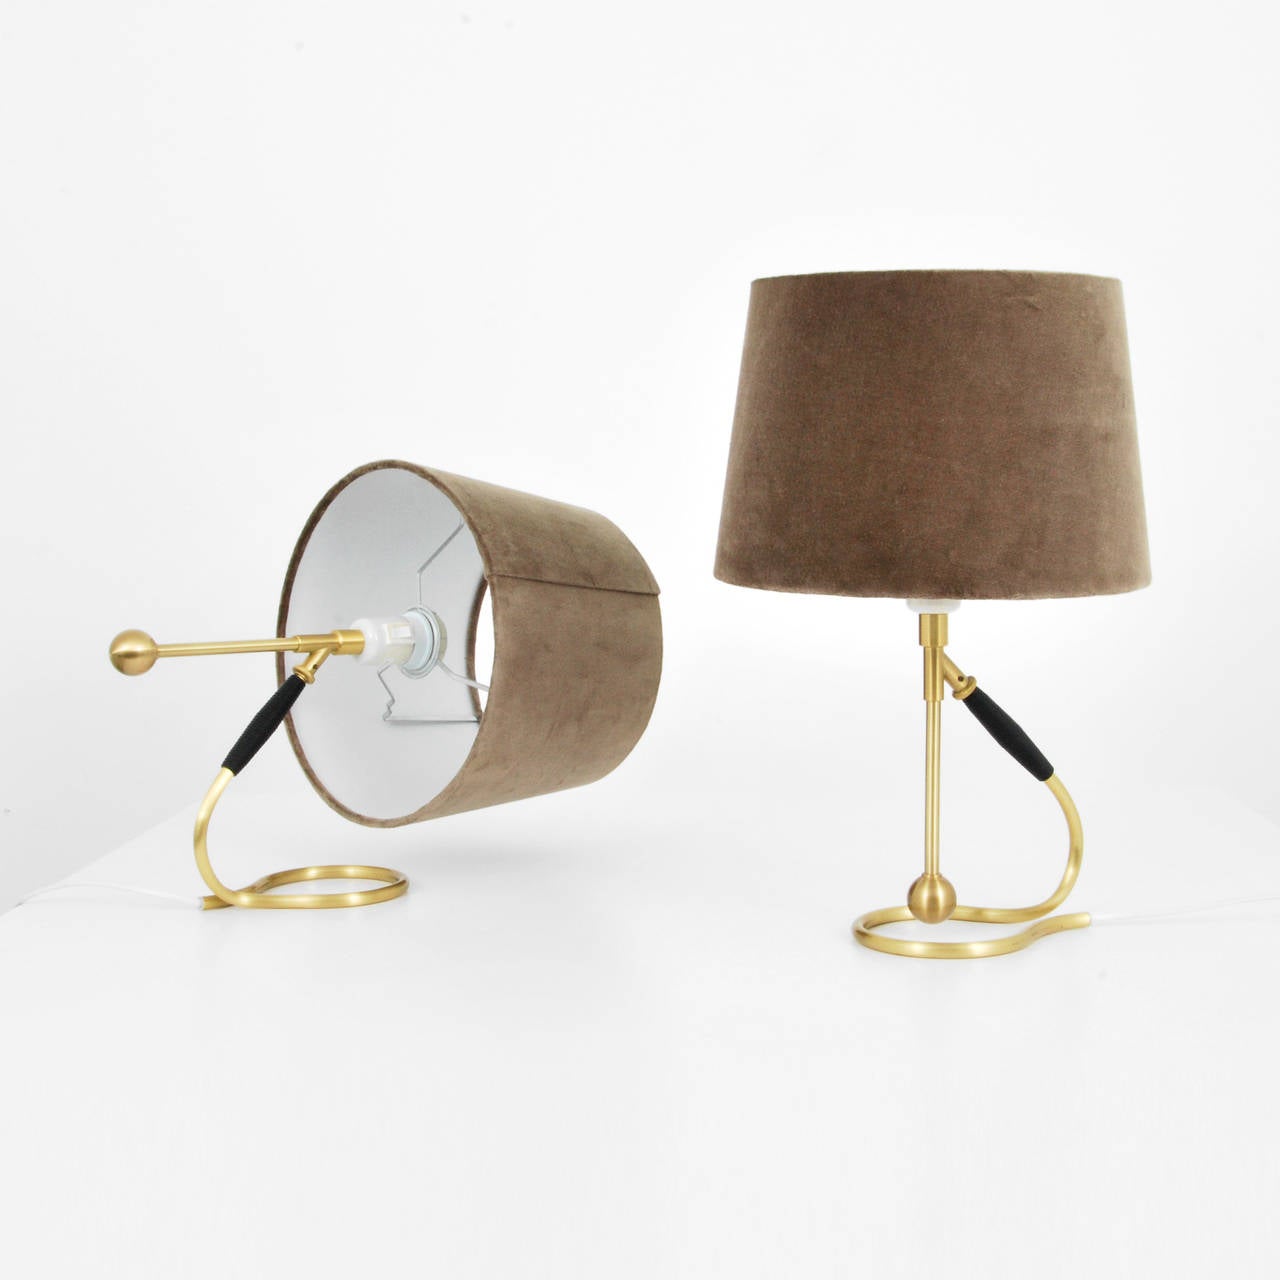 Lamps are model #306 and may be used as table lamps or sconces by Kaare Klint.